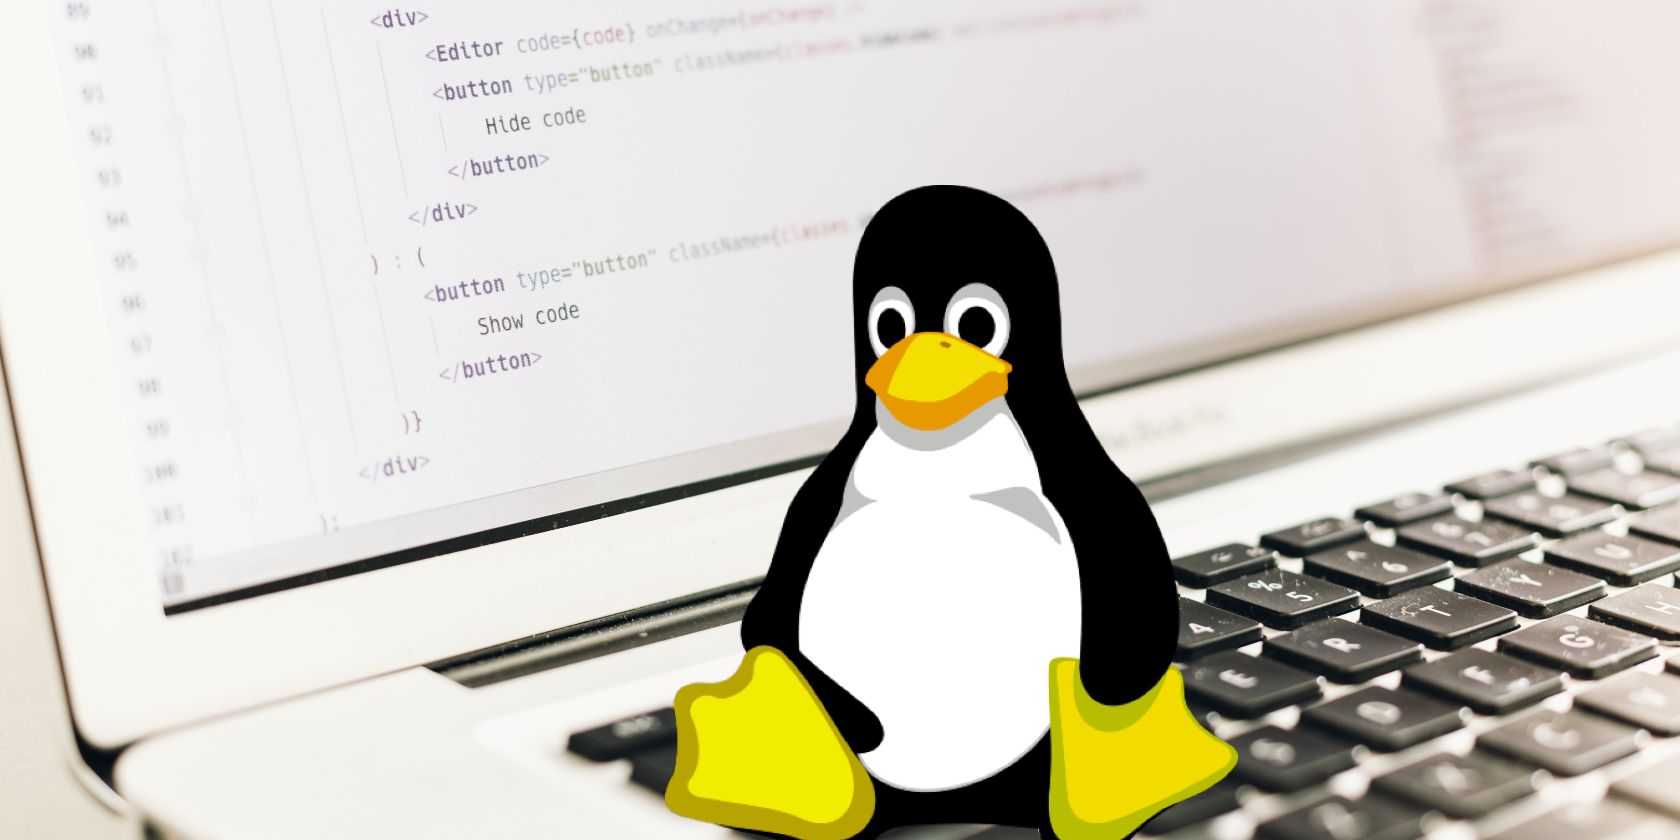 Laptop screen with Linux's logo, a penguin